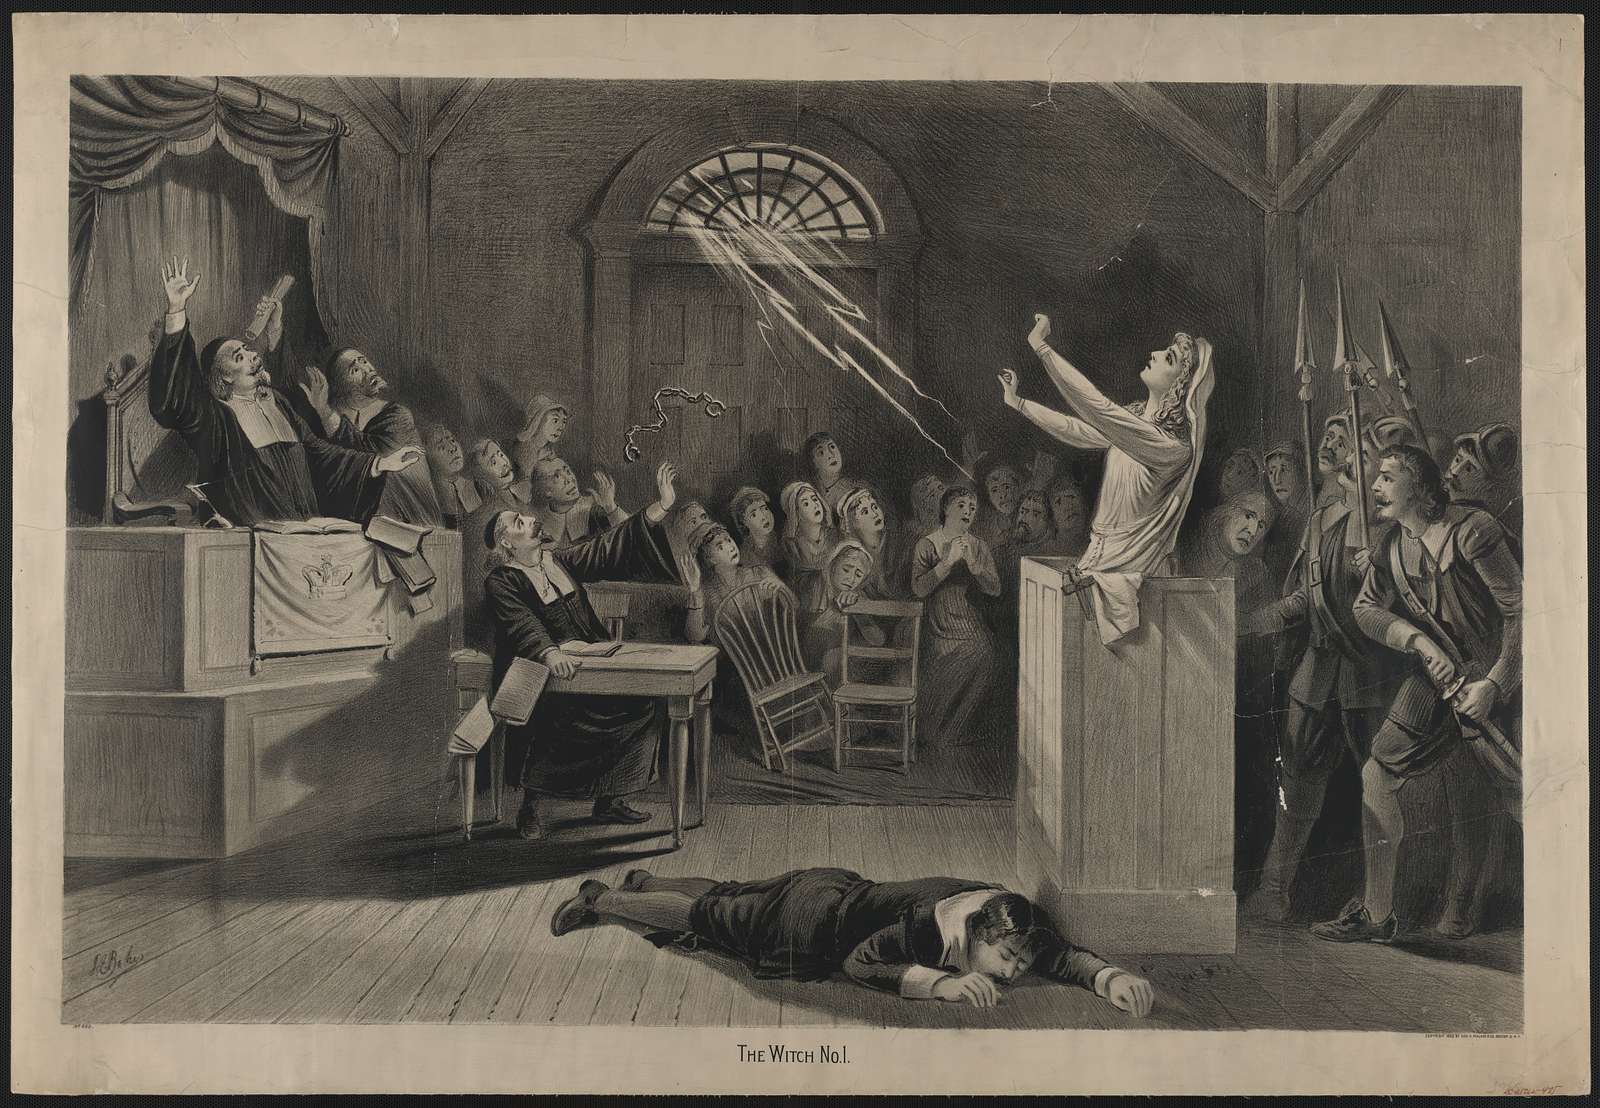 woodcut image of a trial, one person lies on the floor in front of another who stands behind a podium arms raised towards the judges. There is a crowd of onlookers in the background. 